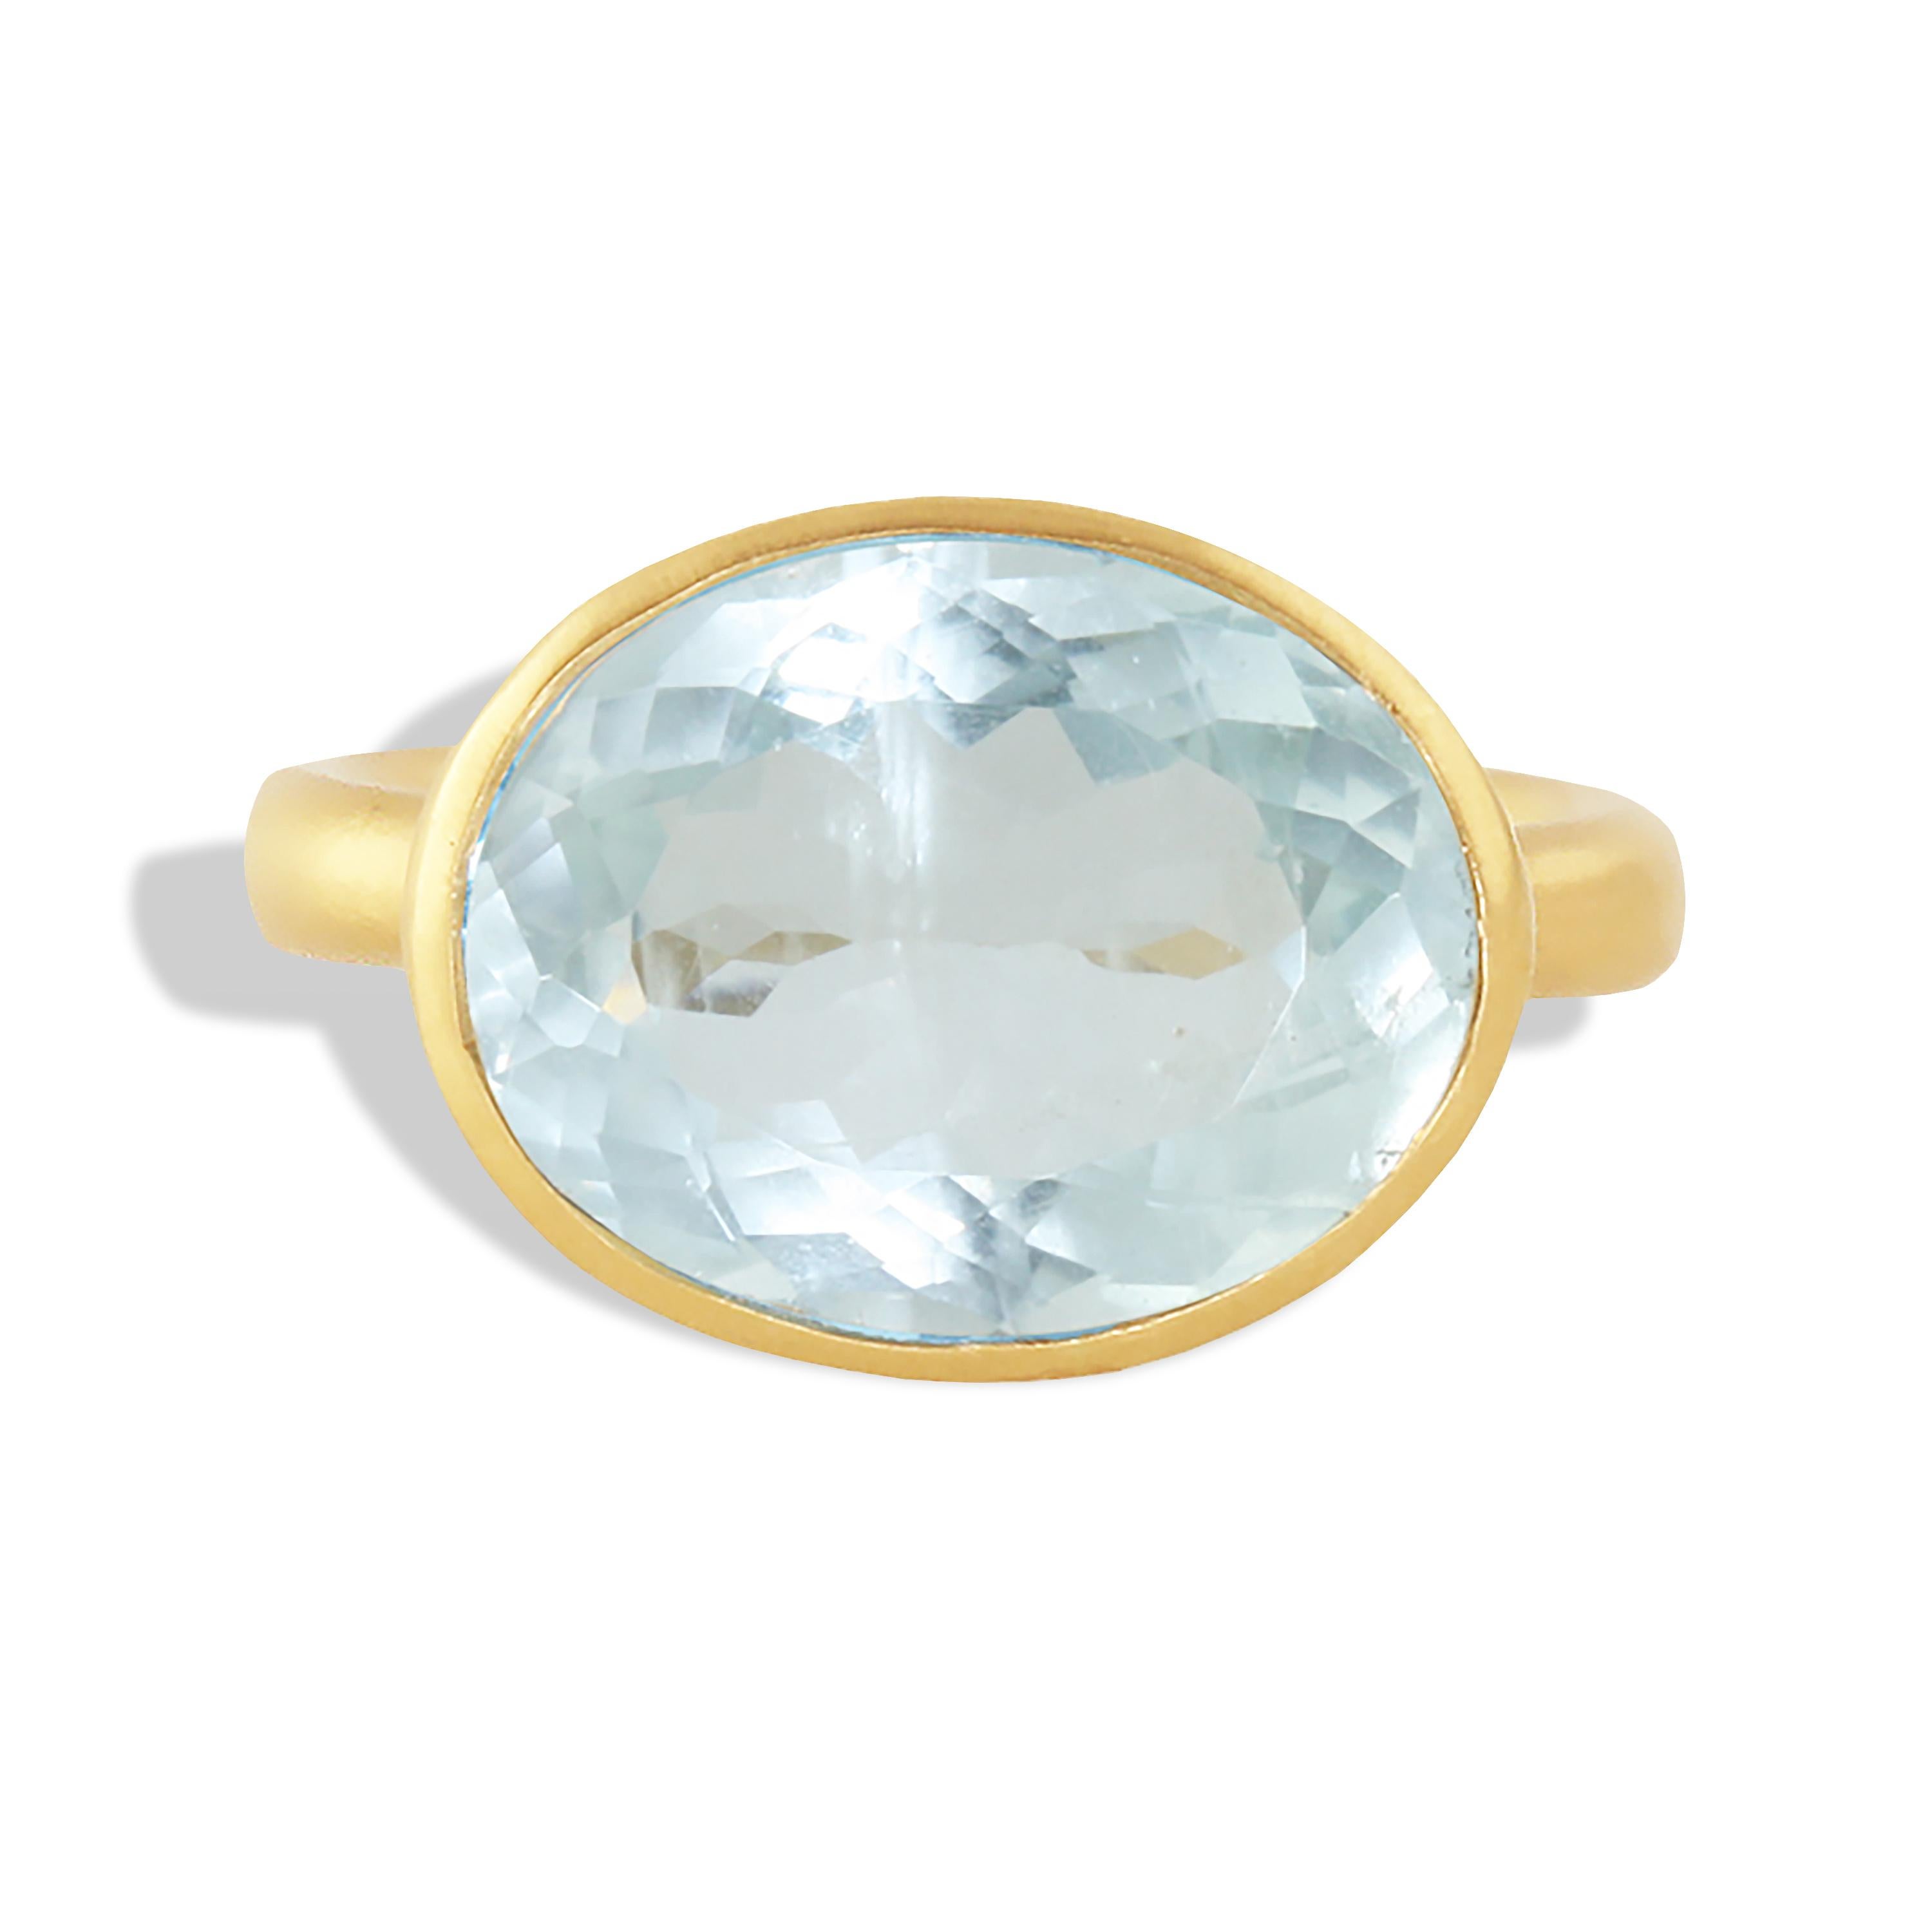 A 7.89 carat light blue shimmering aquamarine ring set in 18k yellow gold with .08 carats of diamonds decorating the wavy bezel it is set in. The name Aquamarine comes from the Latin phrase 